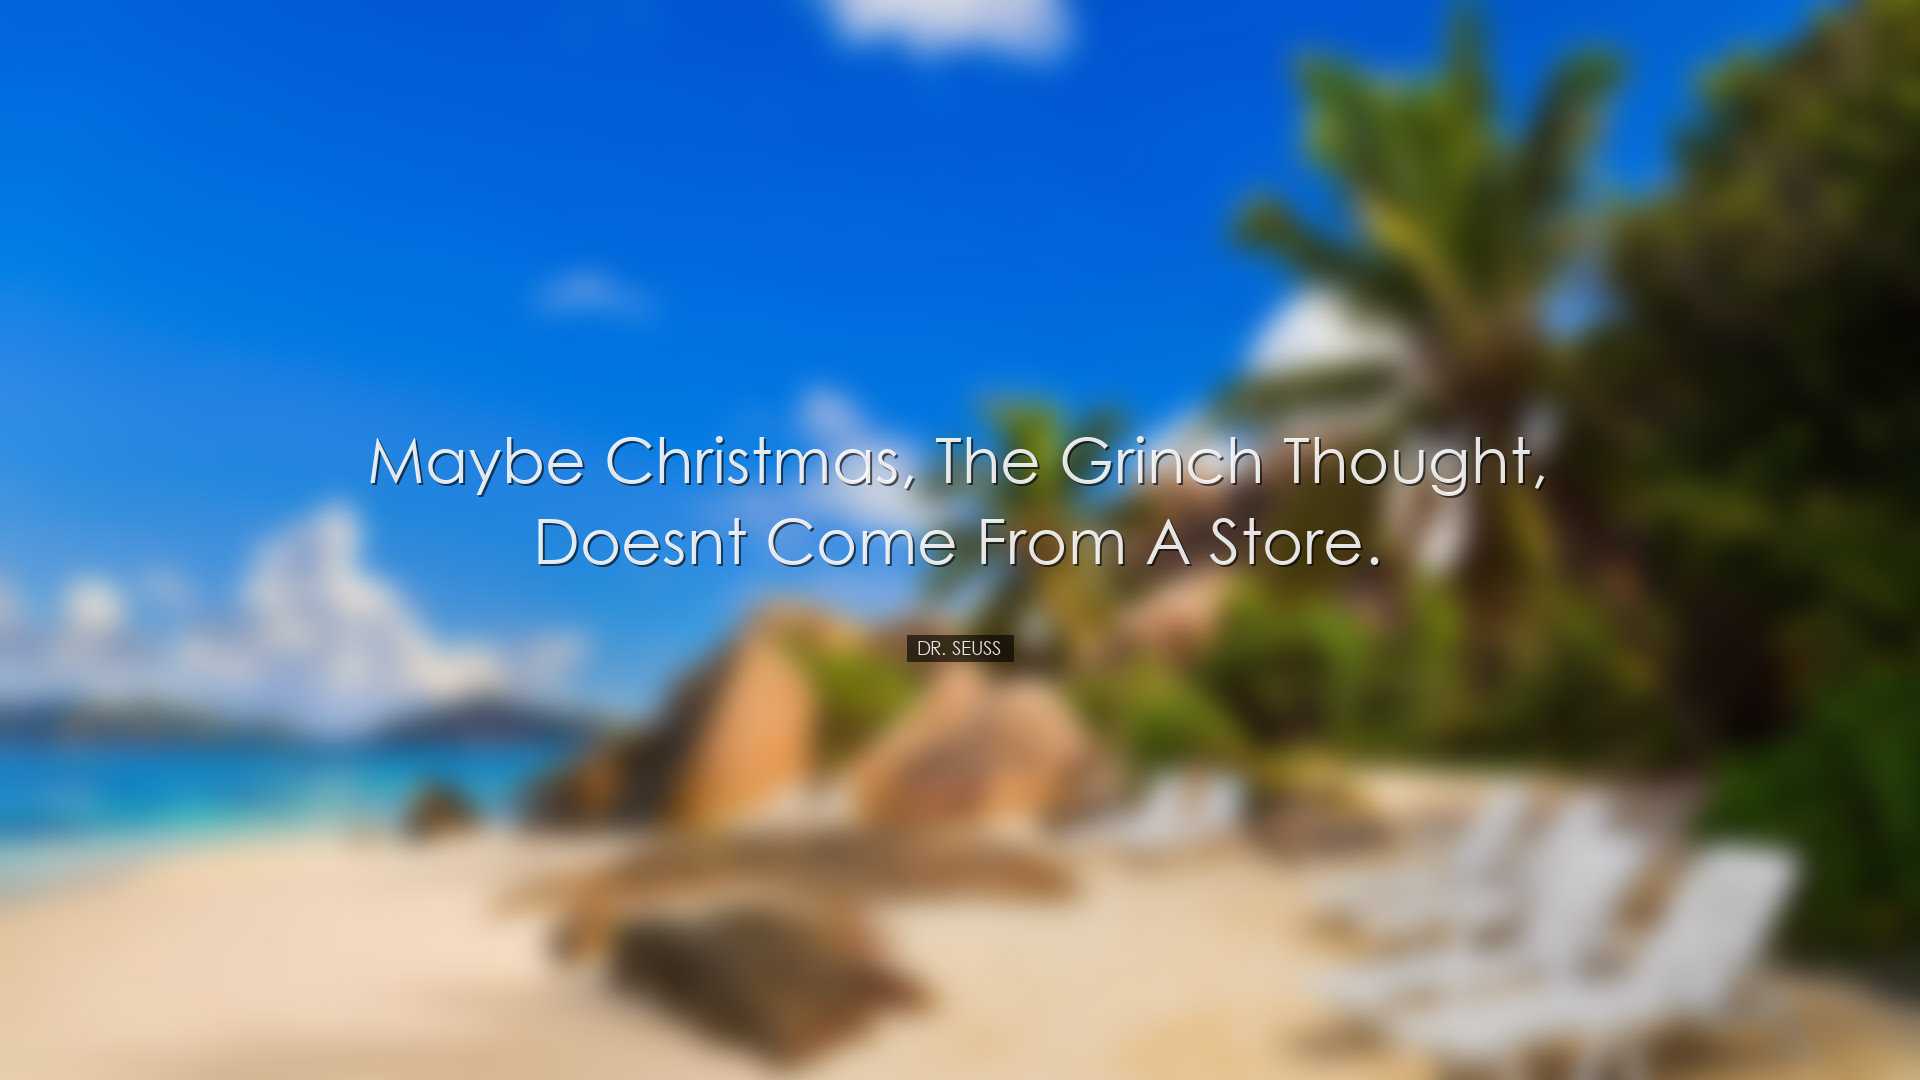 Maybe Christmas, the Grinch thought, doesnt come from a store. - D